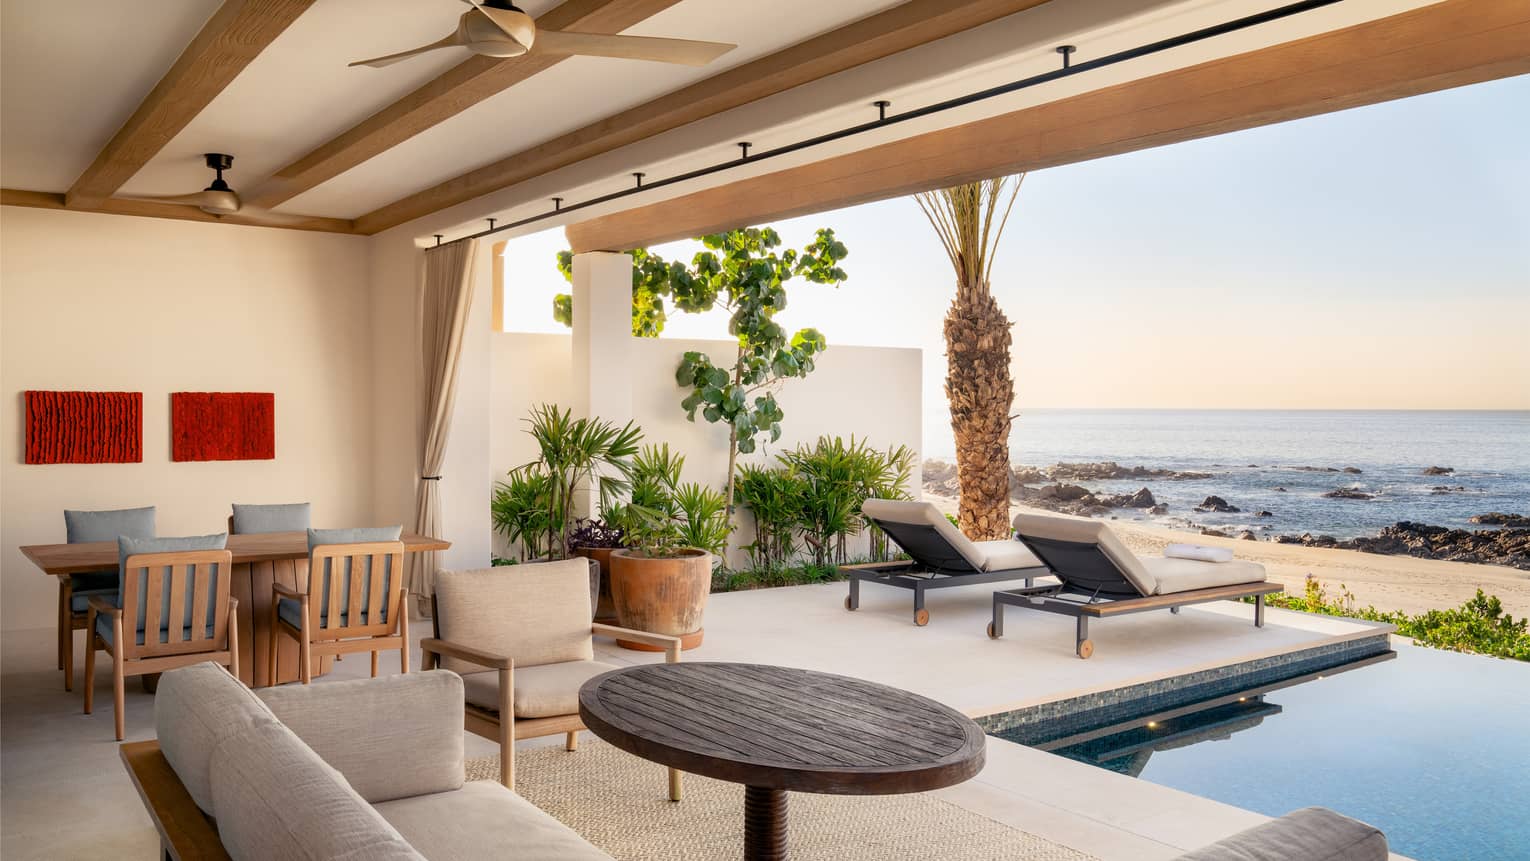 Luxury casita suite terrace with plunge pool and view of the ocean at Four Seasons Resort Cabo San Lucas